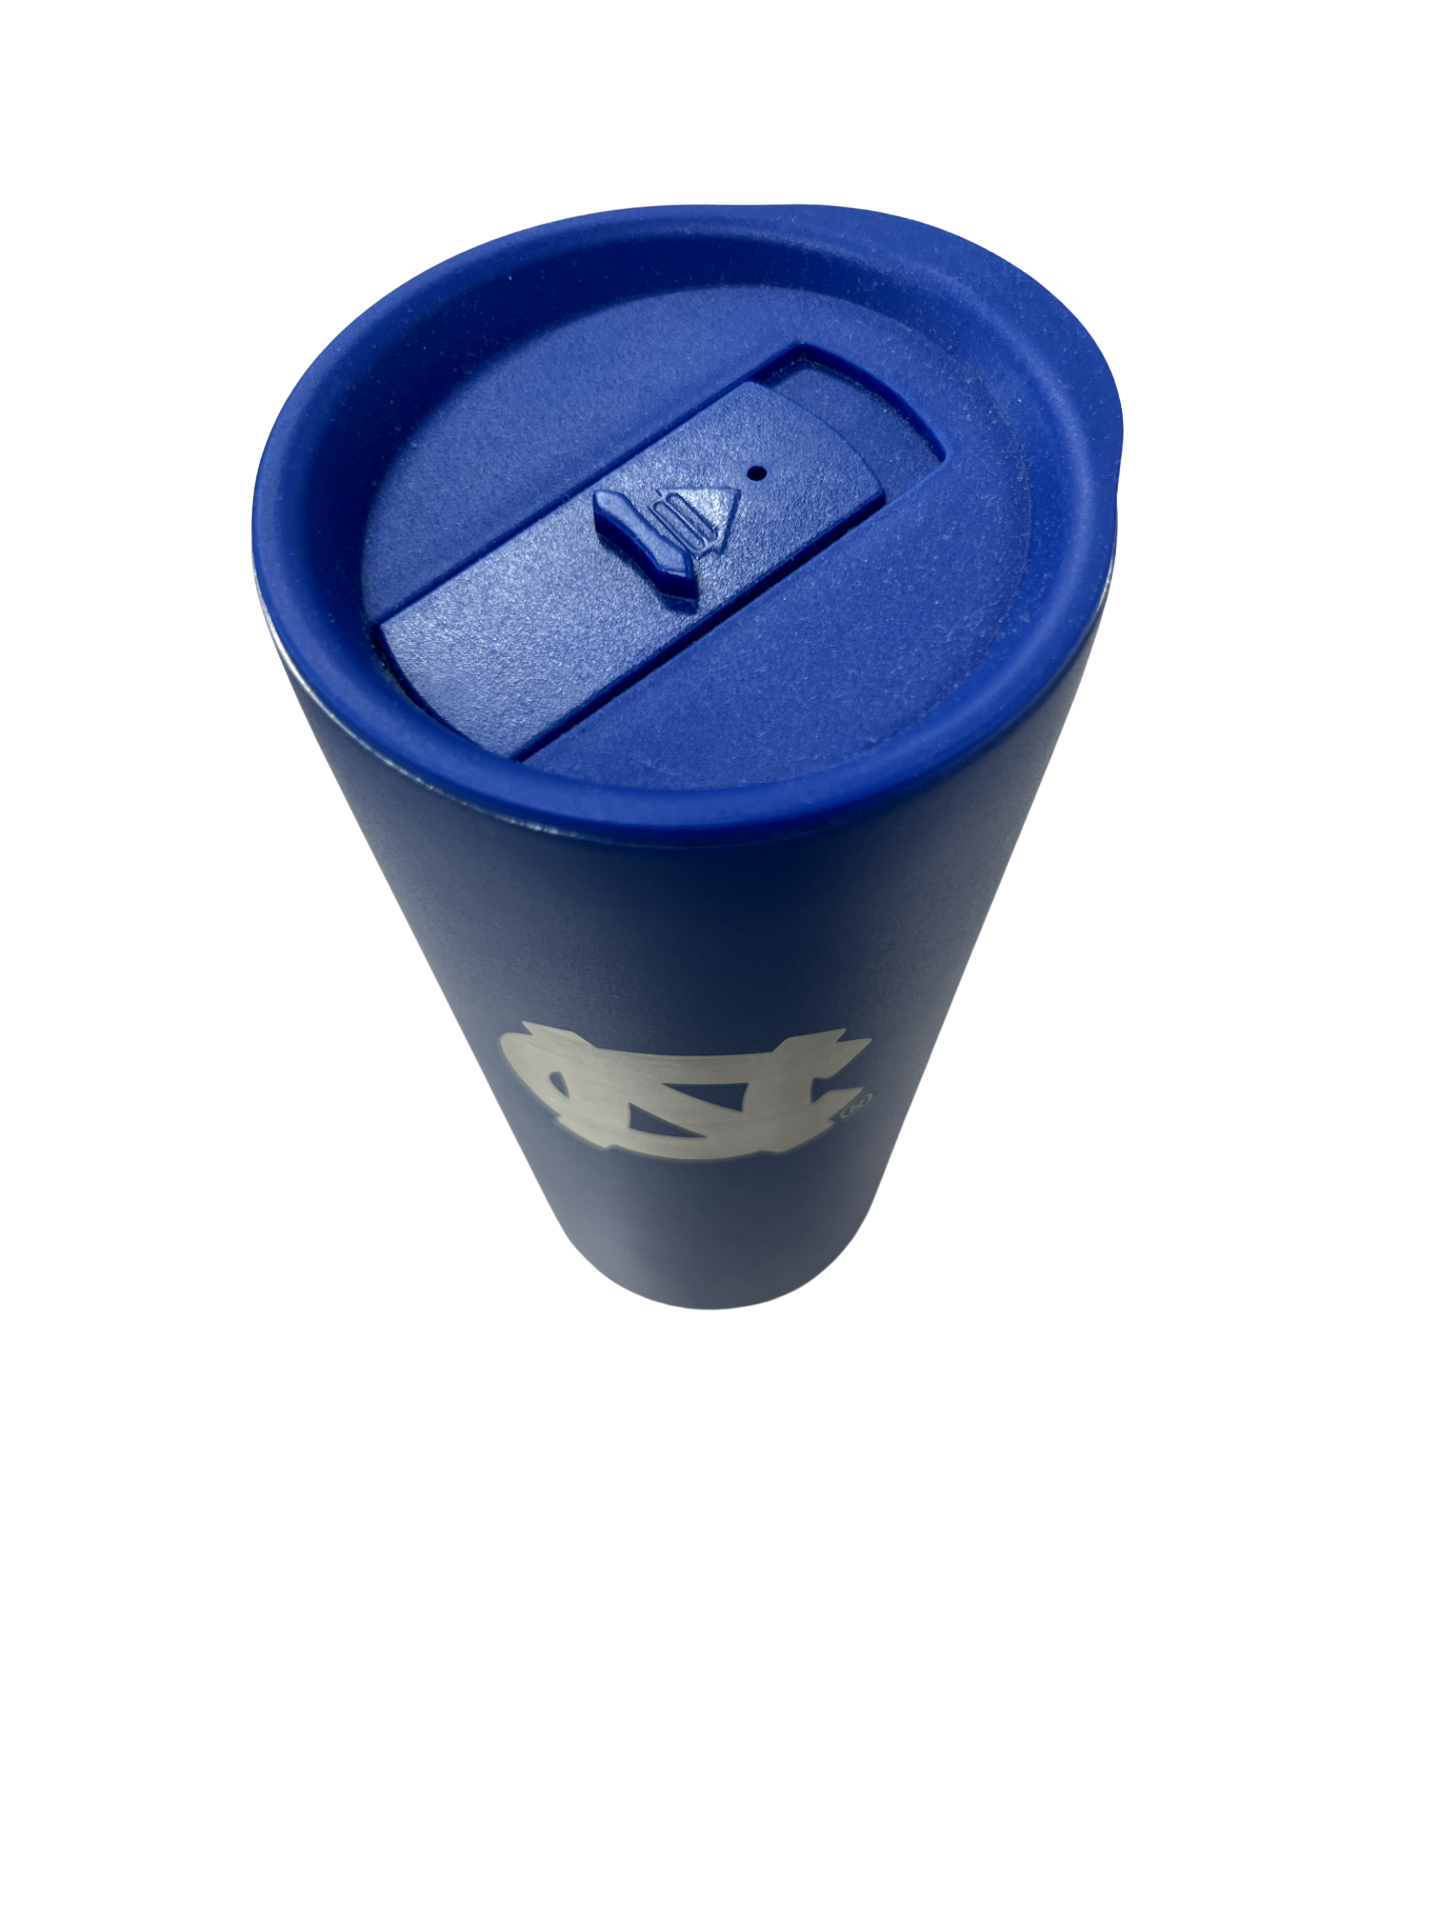 Insulated Stainless Steel Blue UNC Cup